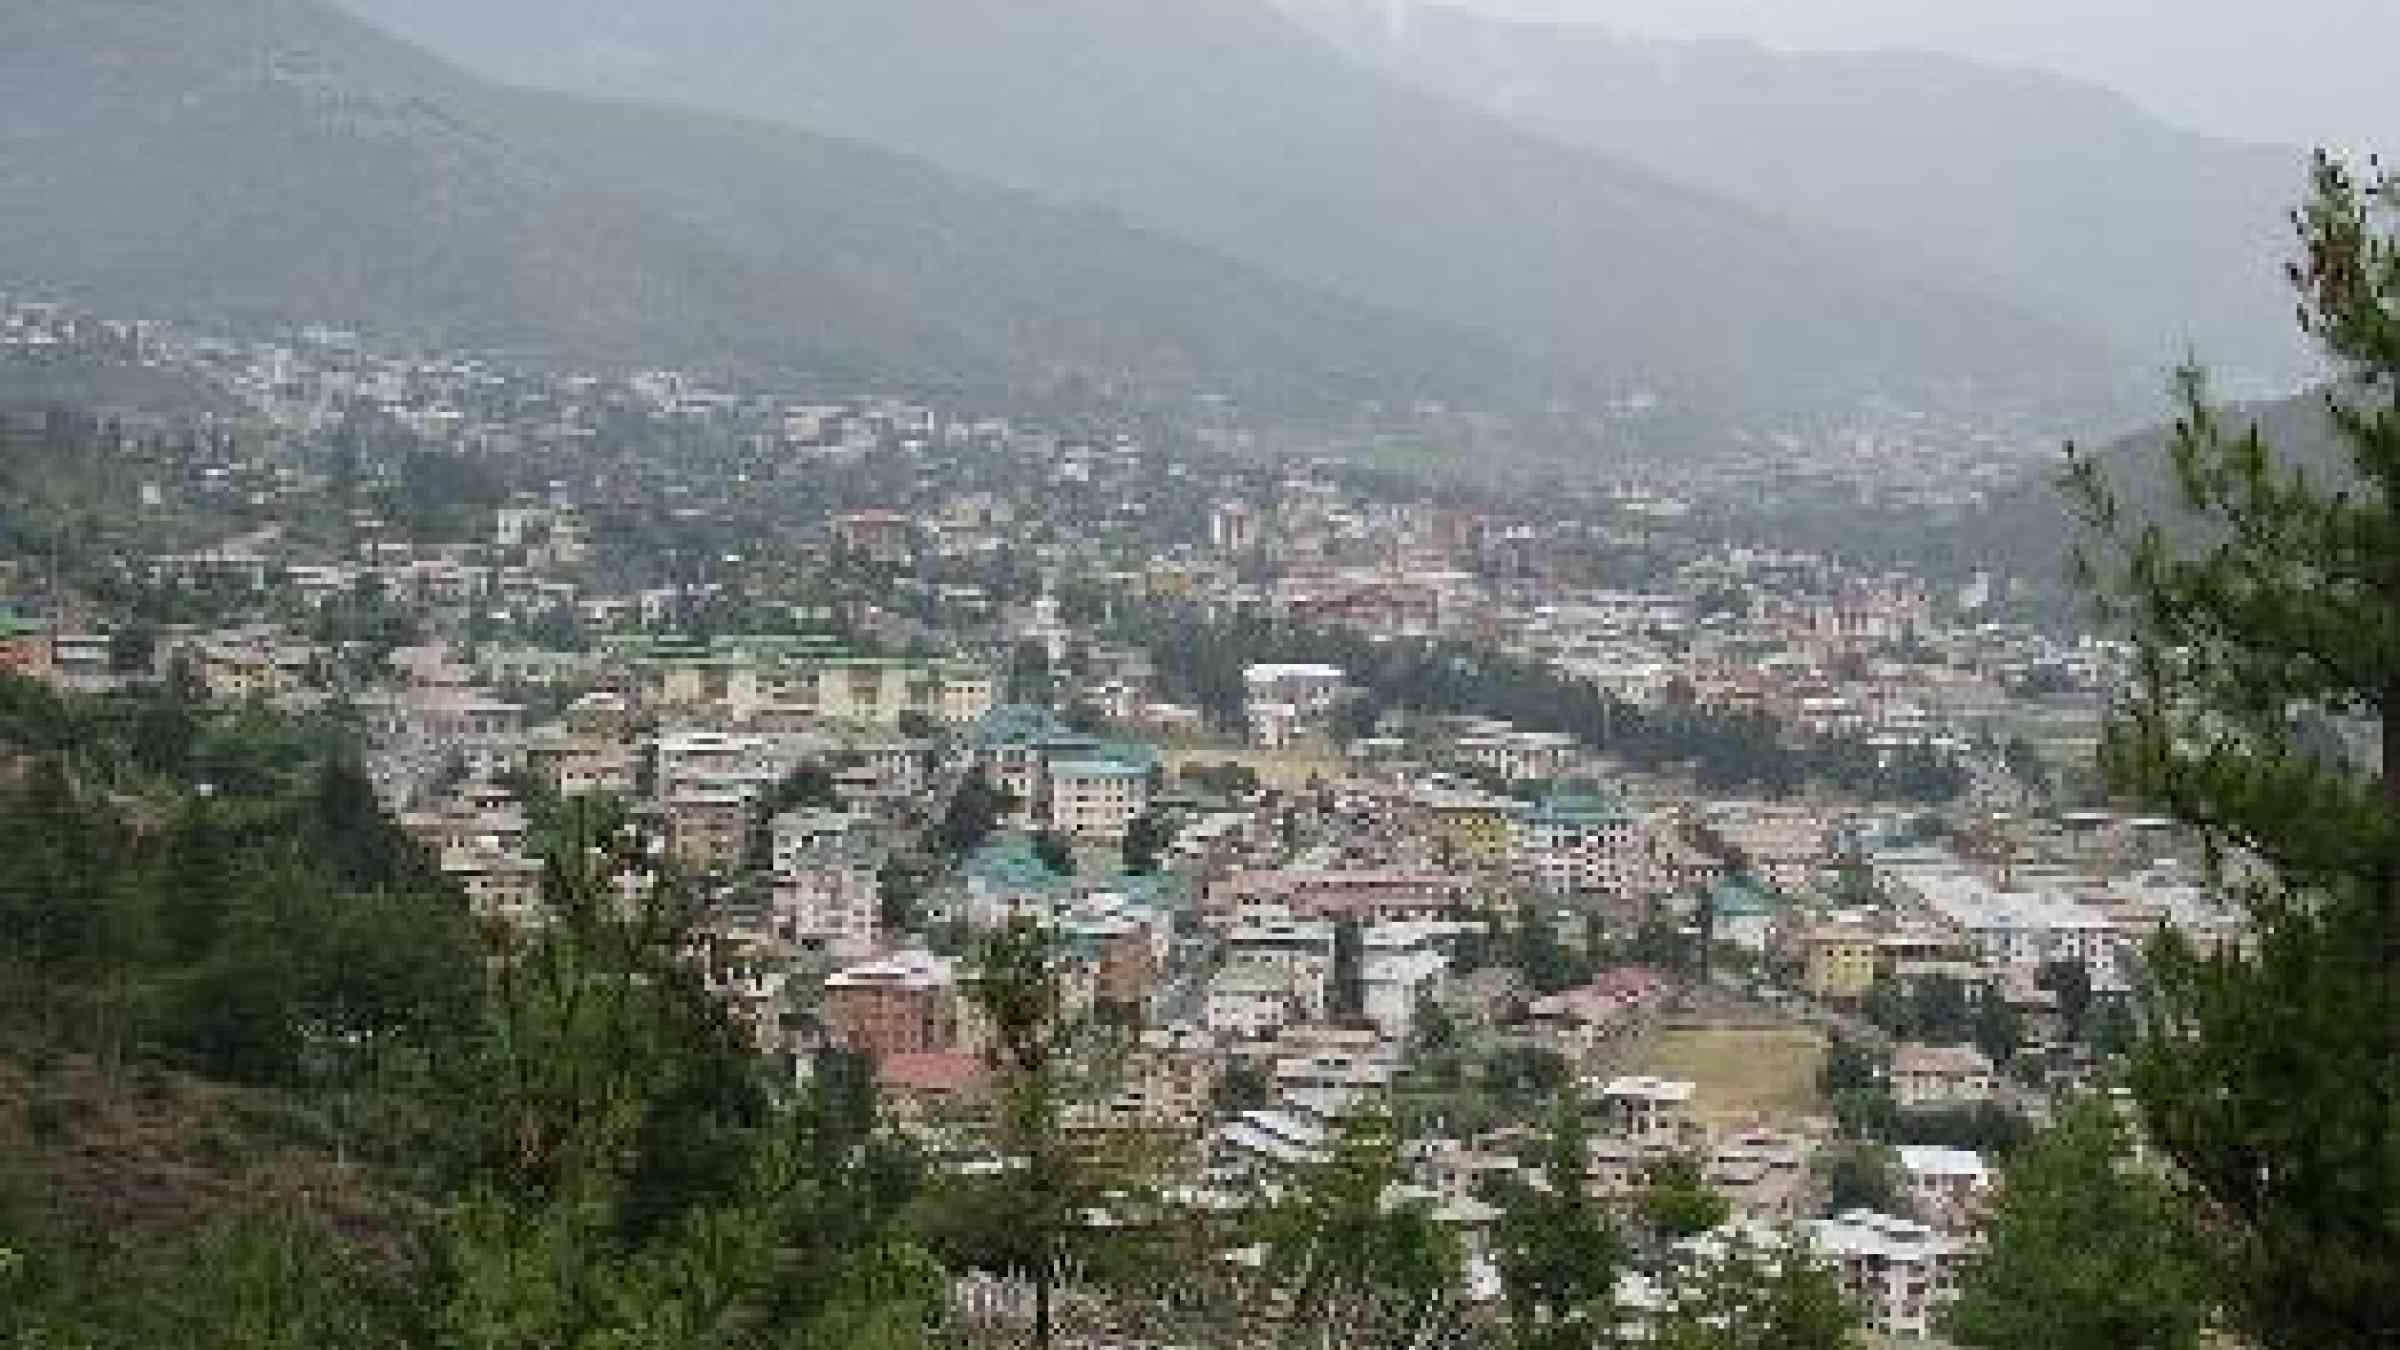 A view over the city of Thimphu,  Kingdom of Bhutan (photo: Wikimedia Commons)